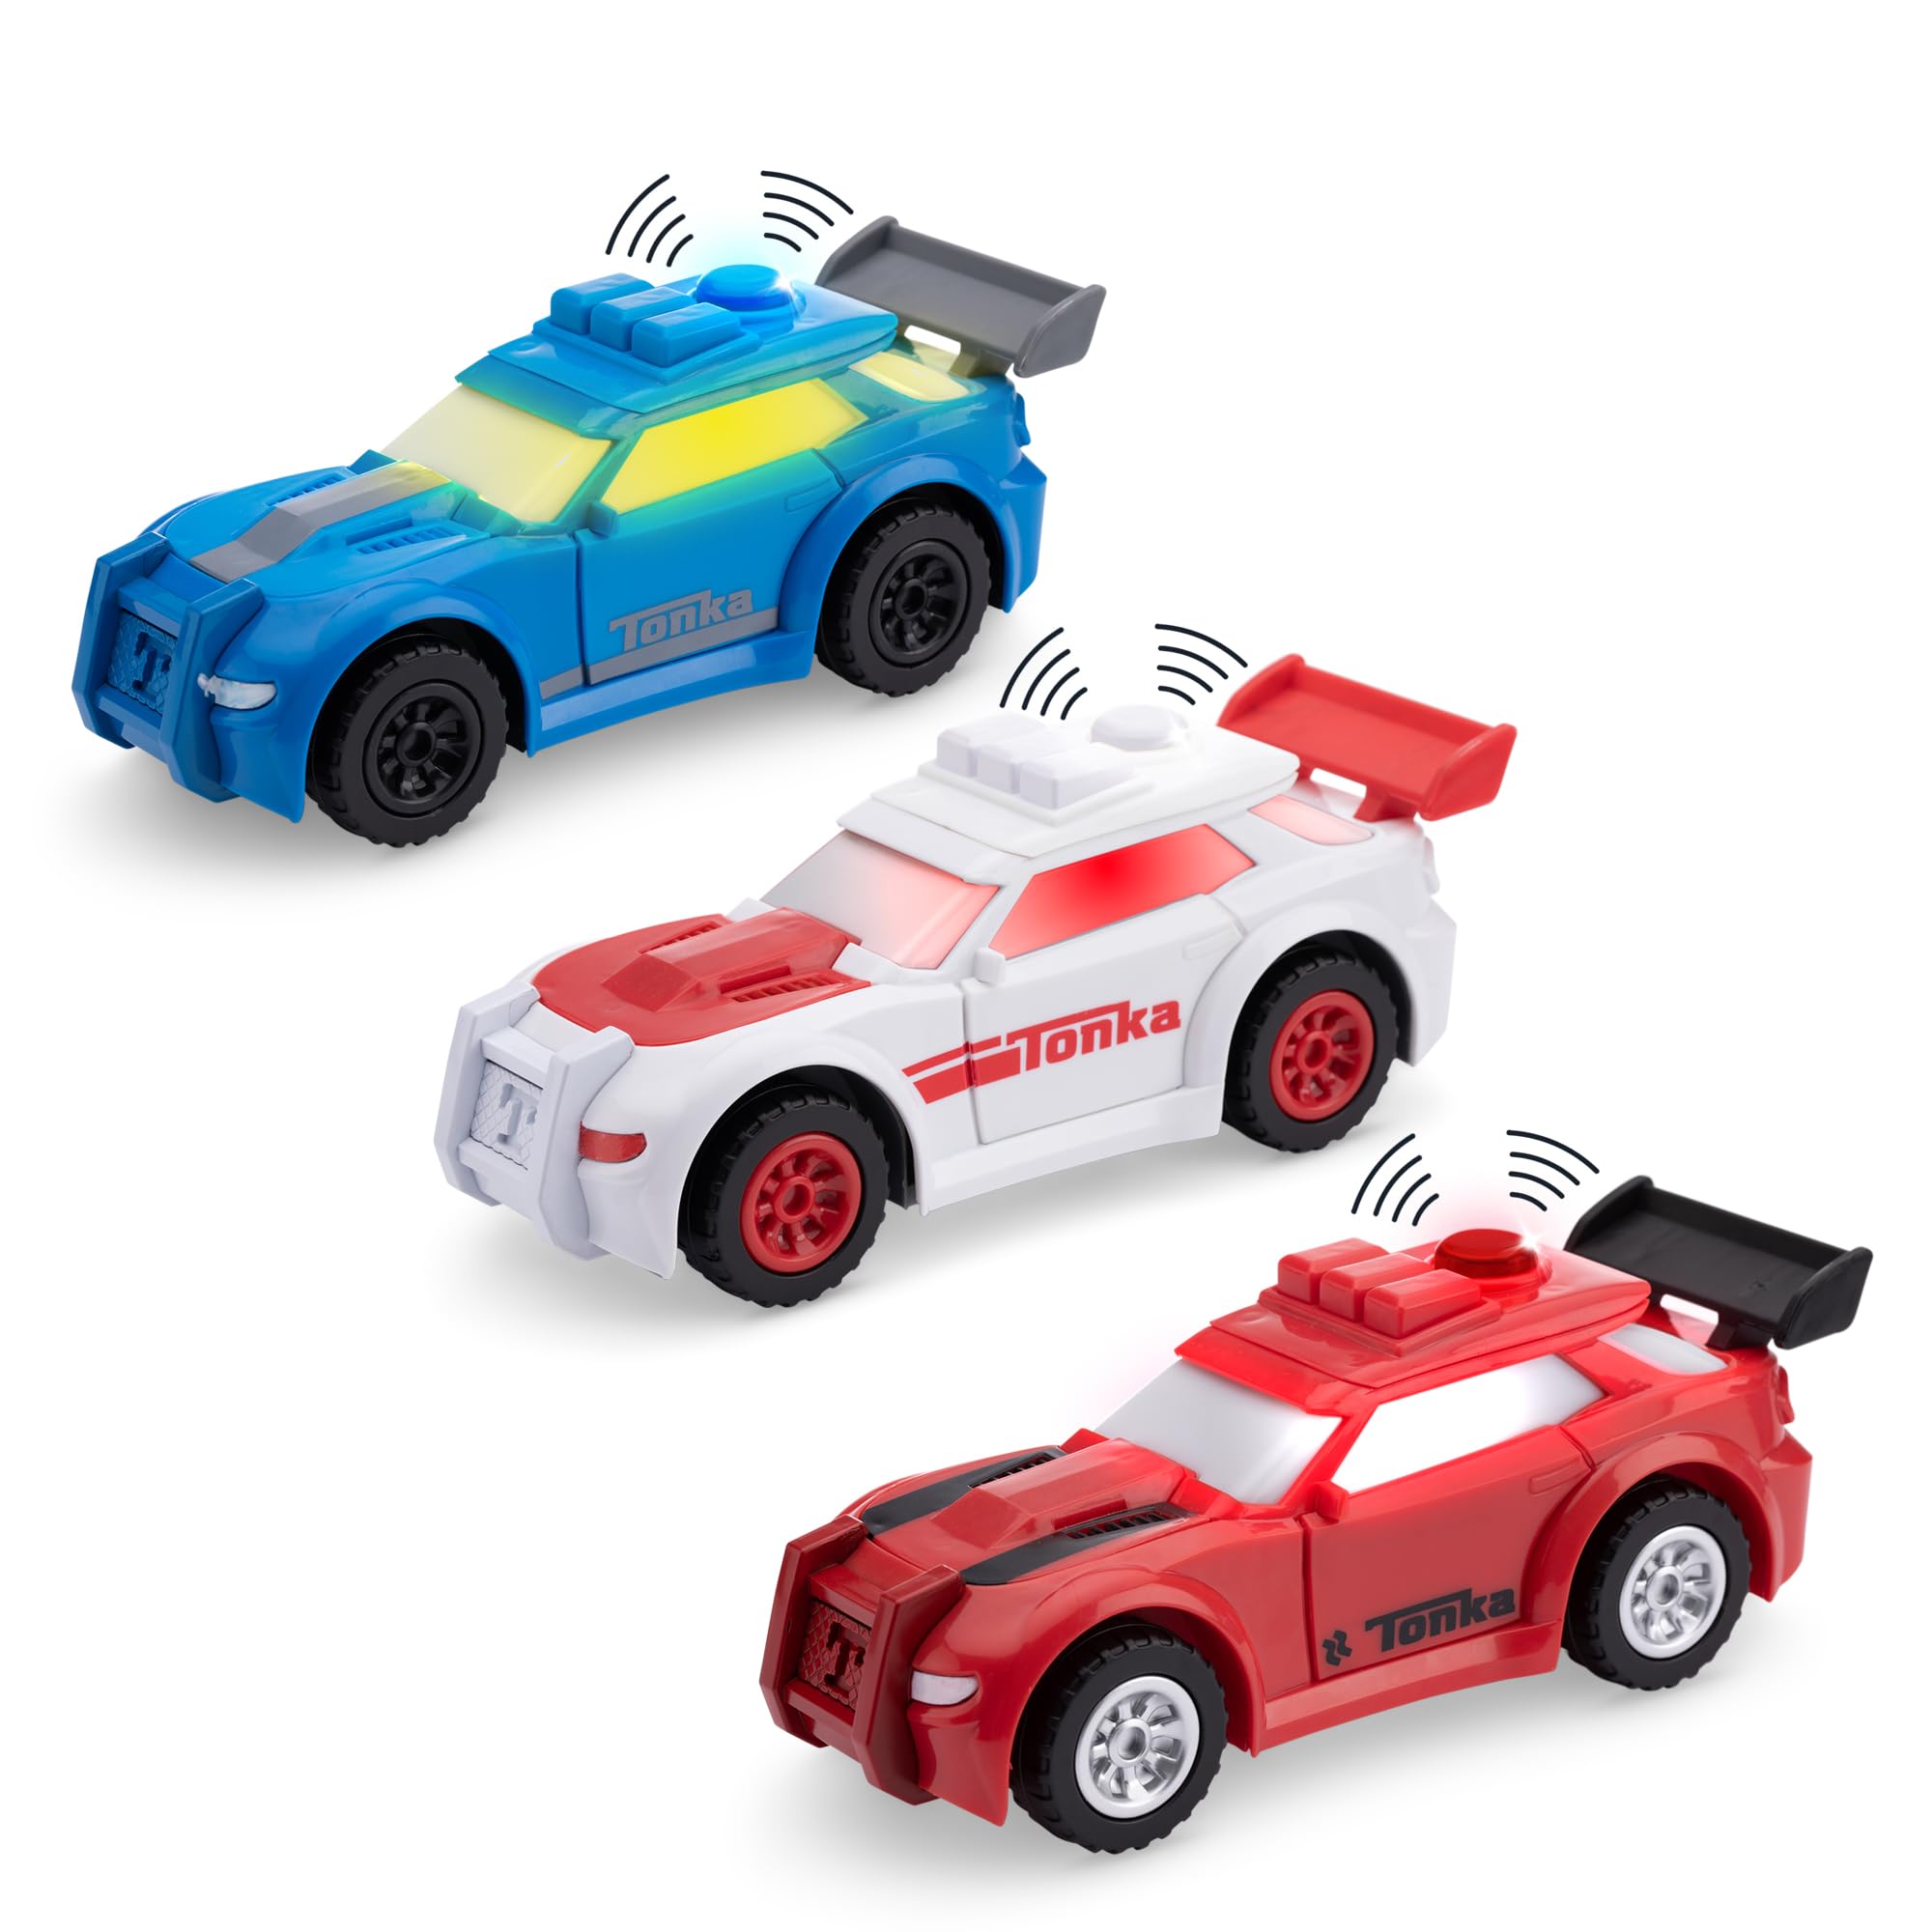 3-Count Tonka Sports Cars Toys w/ Lights & Sounds $9.70 ($3.23 each) + Free Shipping w/ Prime or on $35+